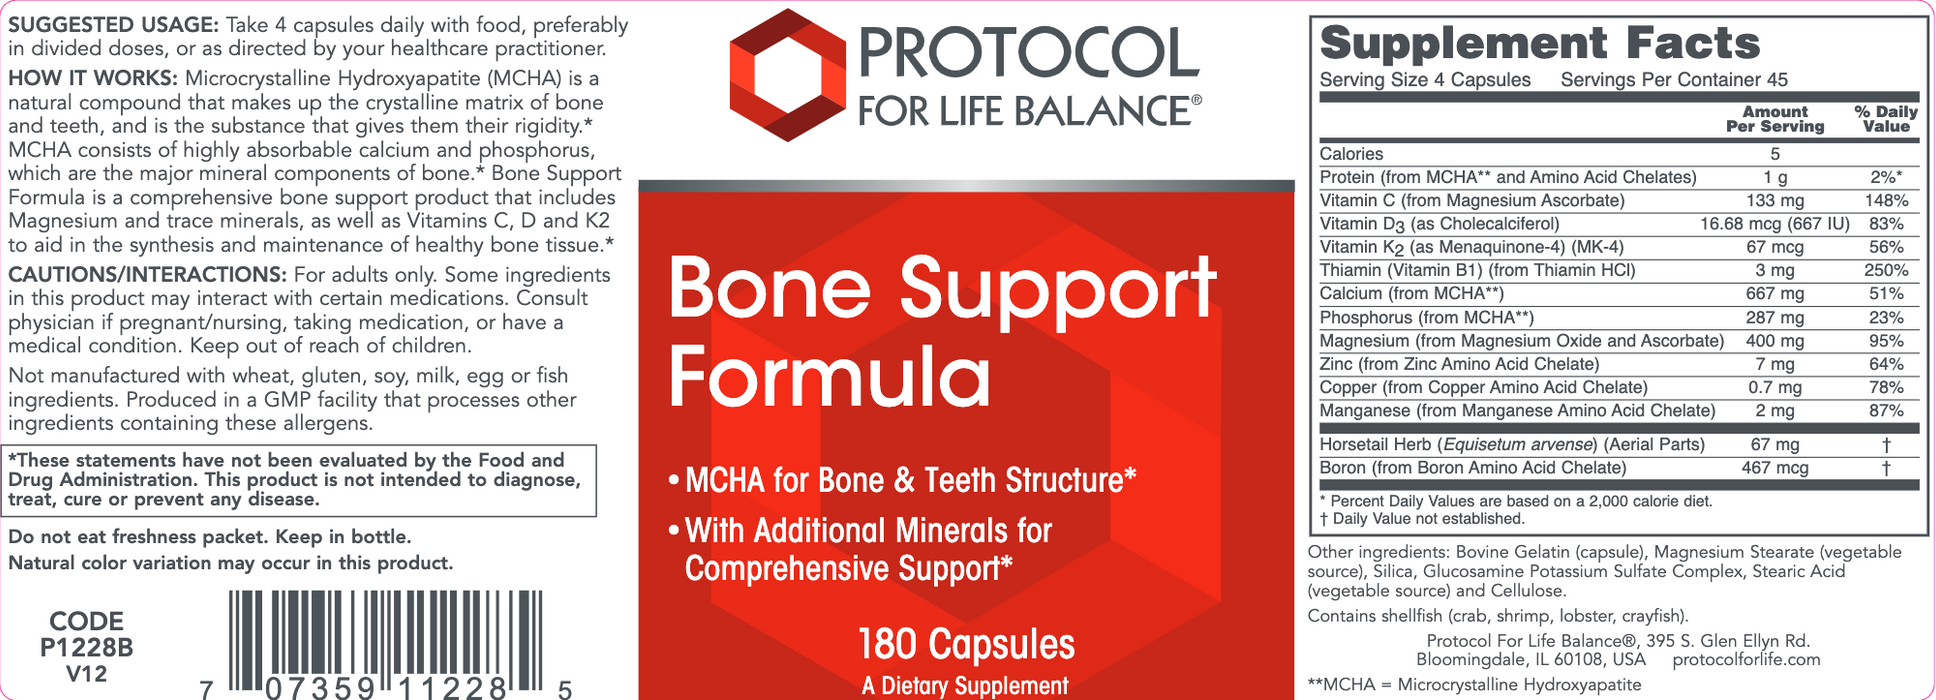 Bone Support Formula (180 Capsules)-Vitamins & Supplements-Protocol For Life Balance-Pine Street Clinic